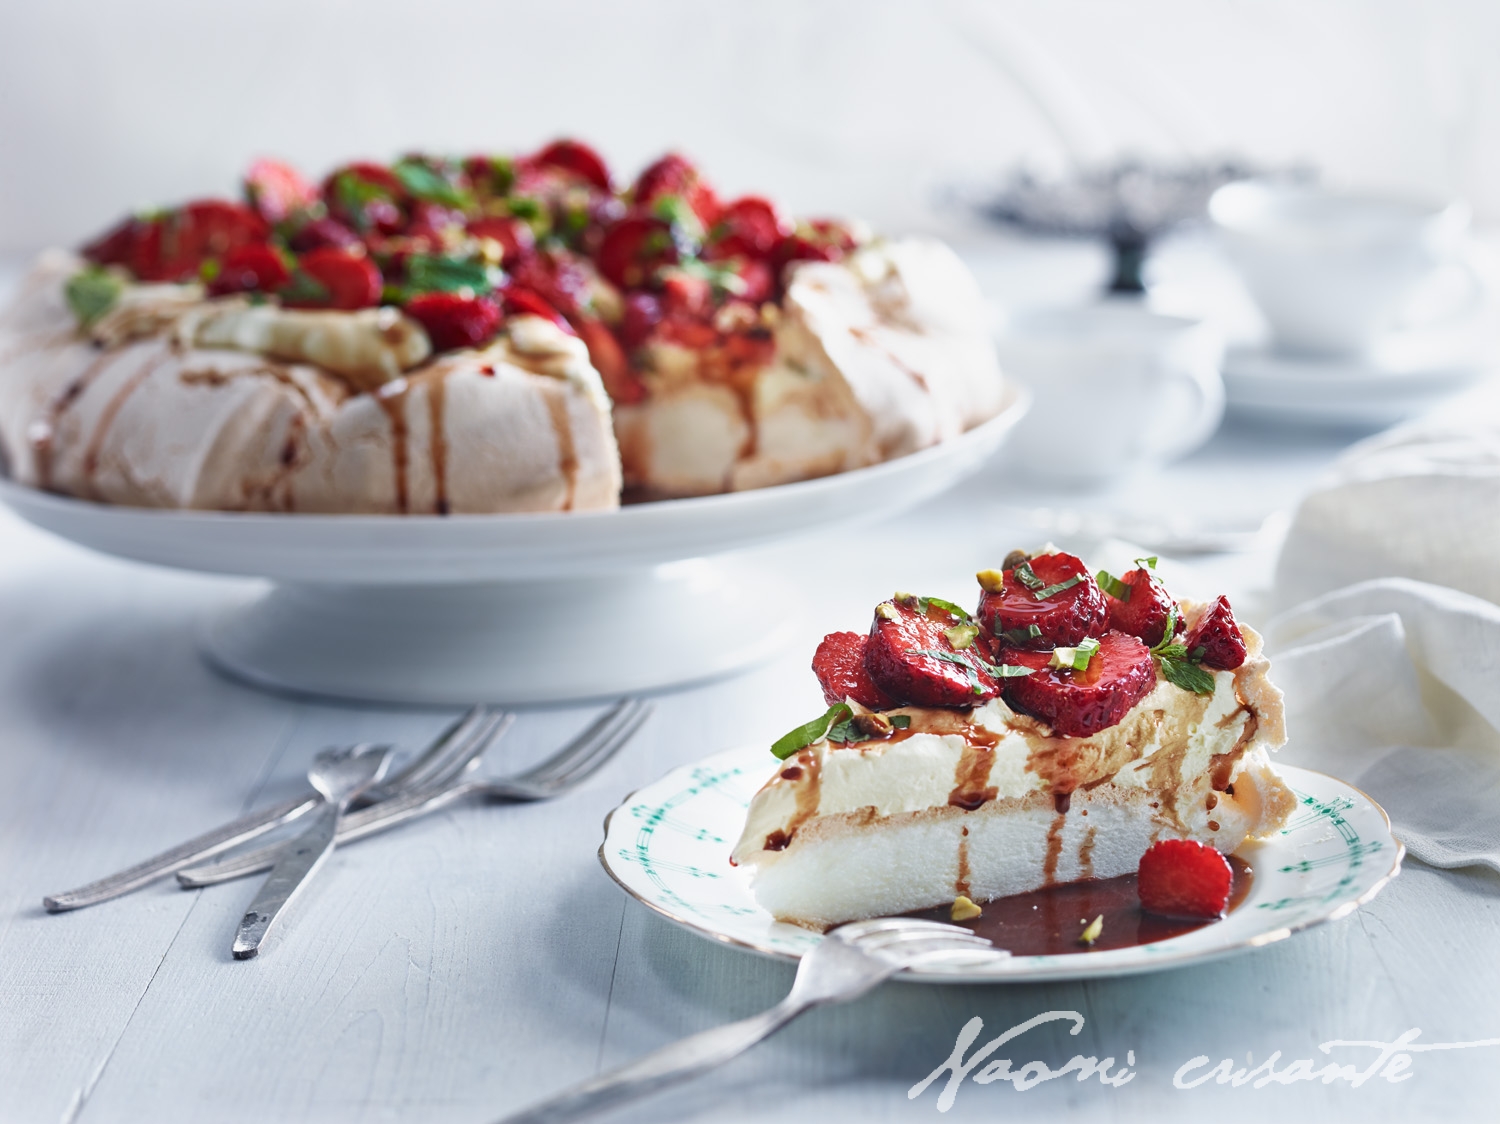 Rosewater Pavlova with Balsamic Strawberries and Pistachios